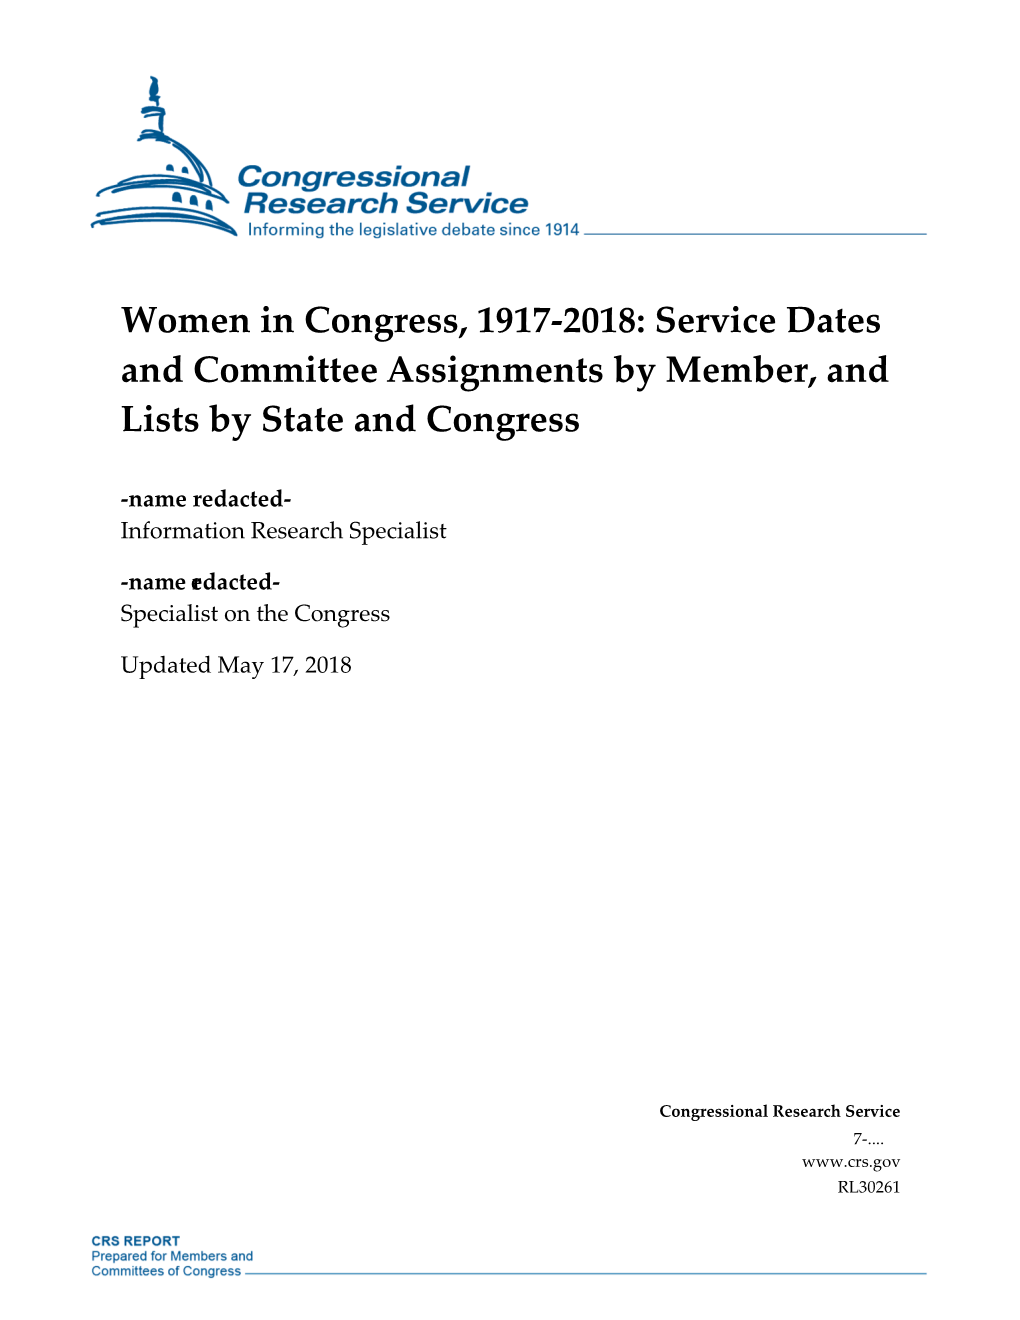 Women in Congress, 1917-2018: Service Dates and Committee Assignments by Member, and Lists by State and Congress